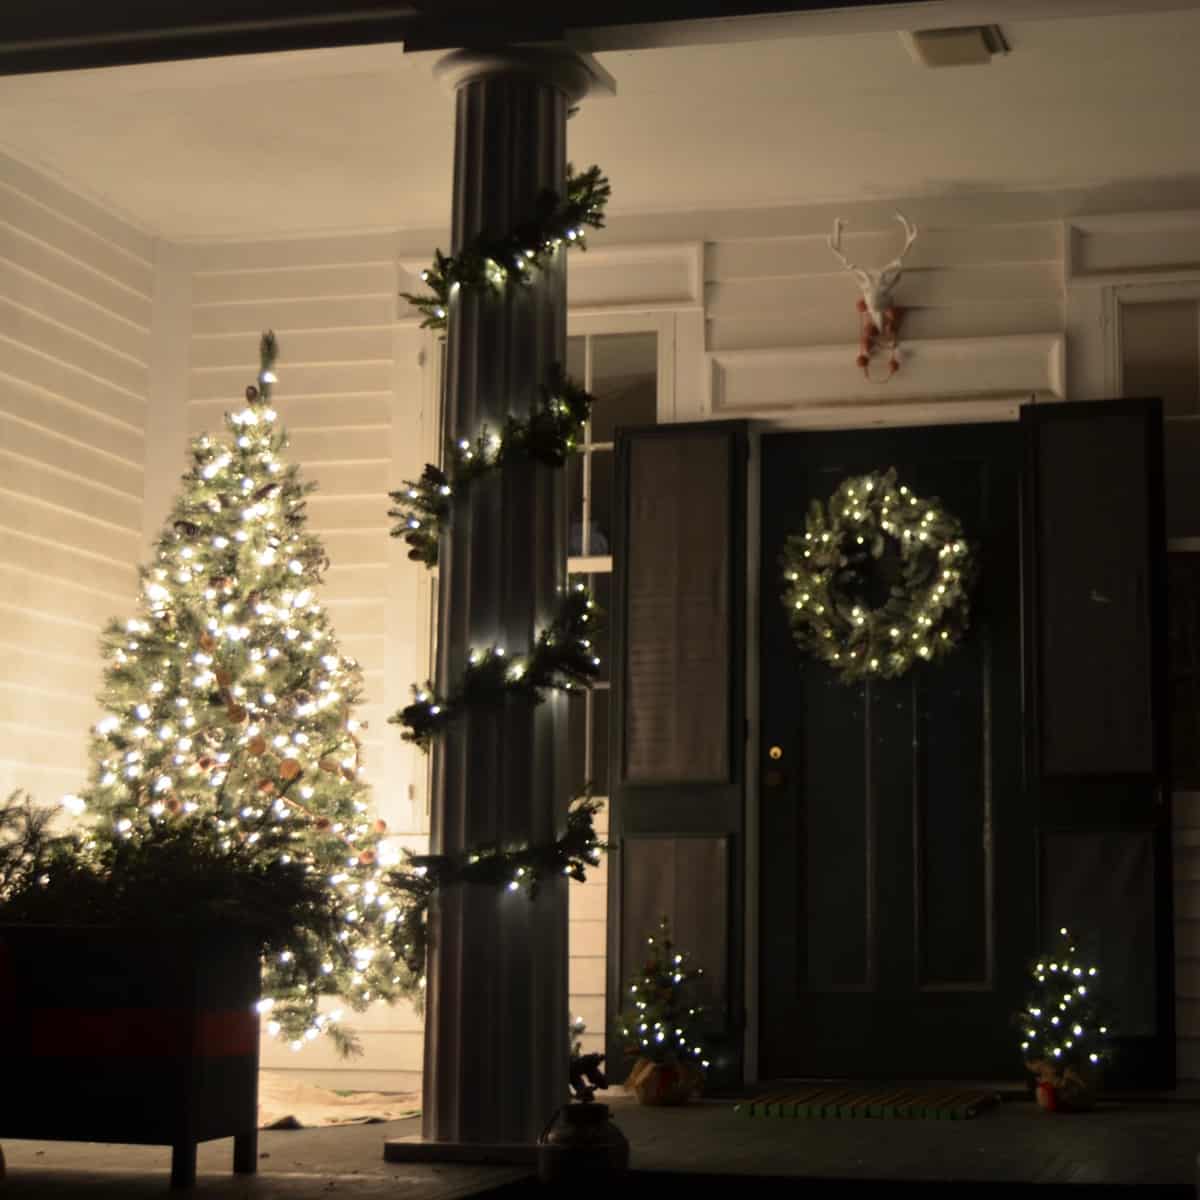 Decorating our New England front porch for Christmas, Connecticut Style.